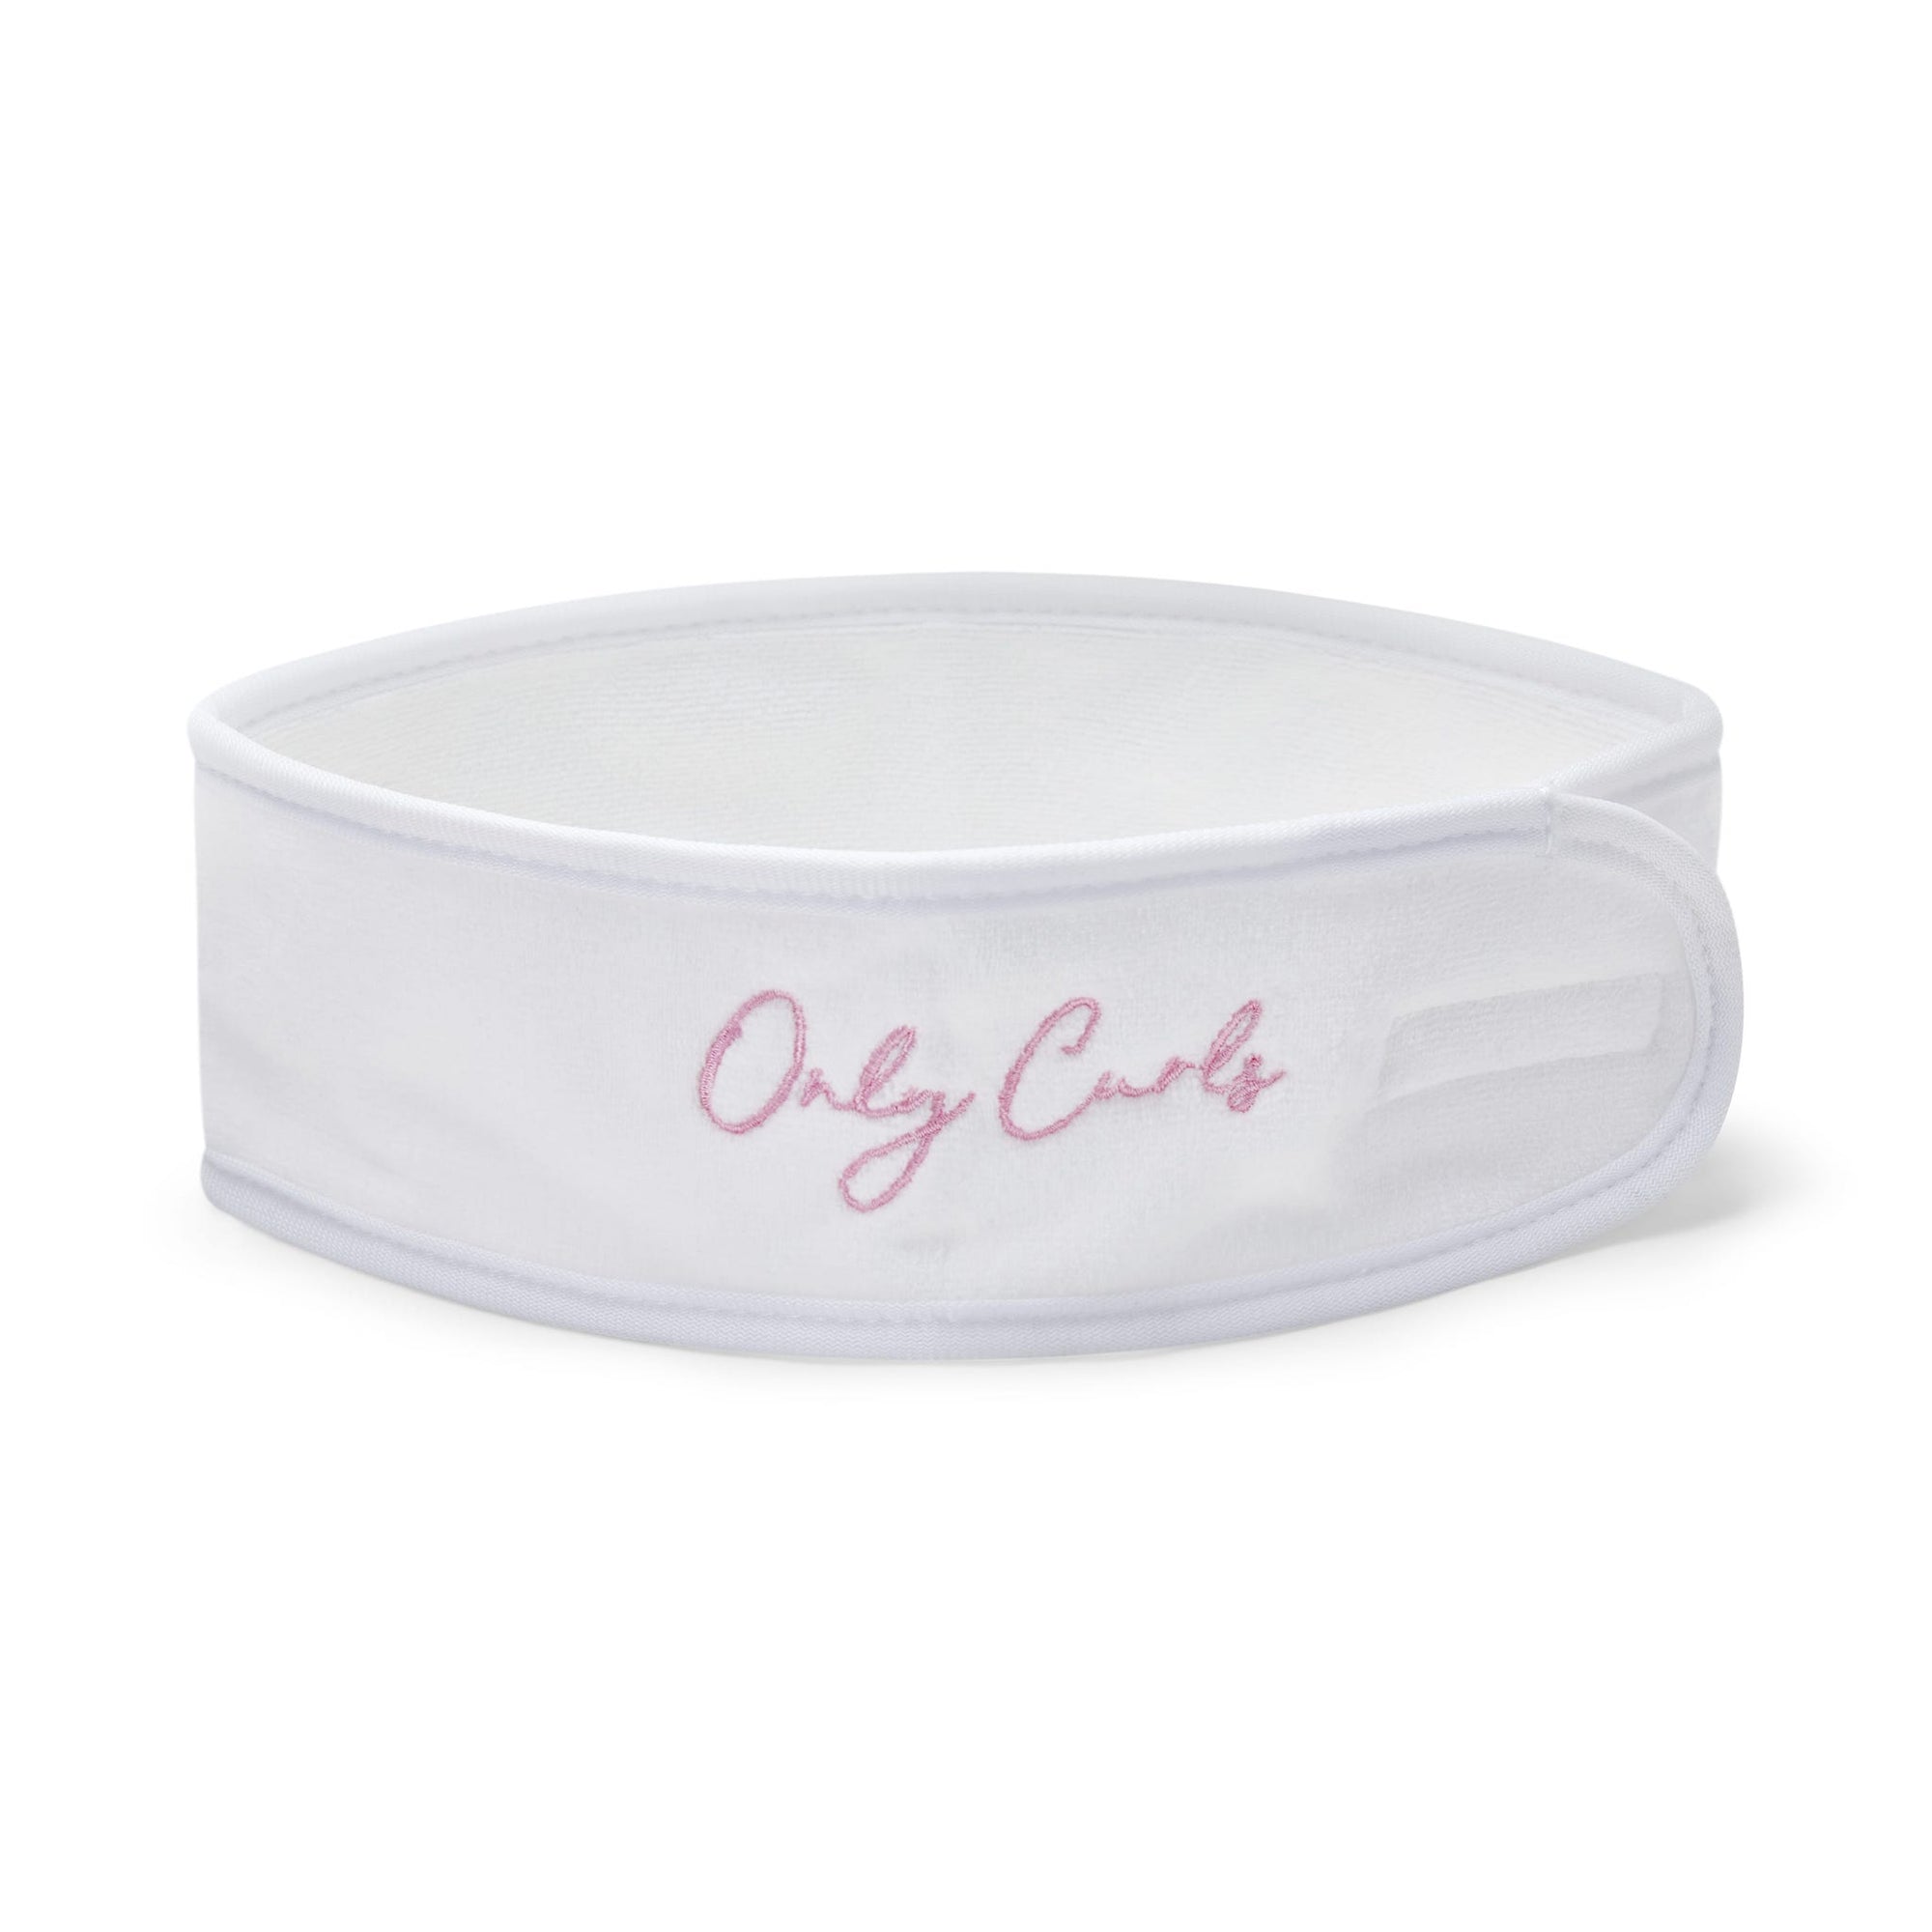 Only Curls Microfibre Headband - White - Only Curls